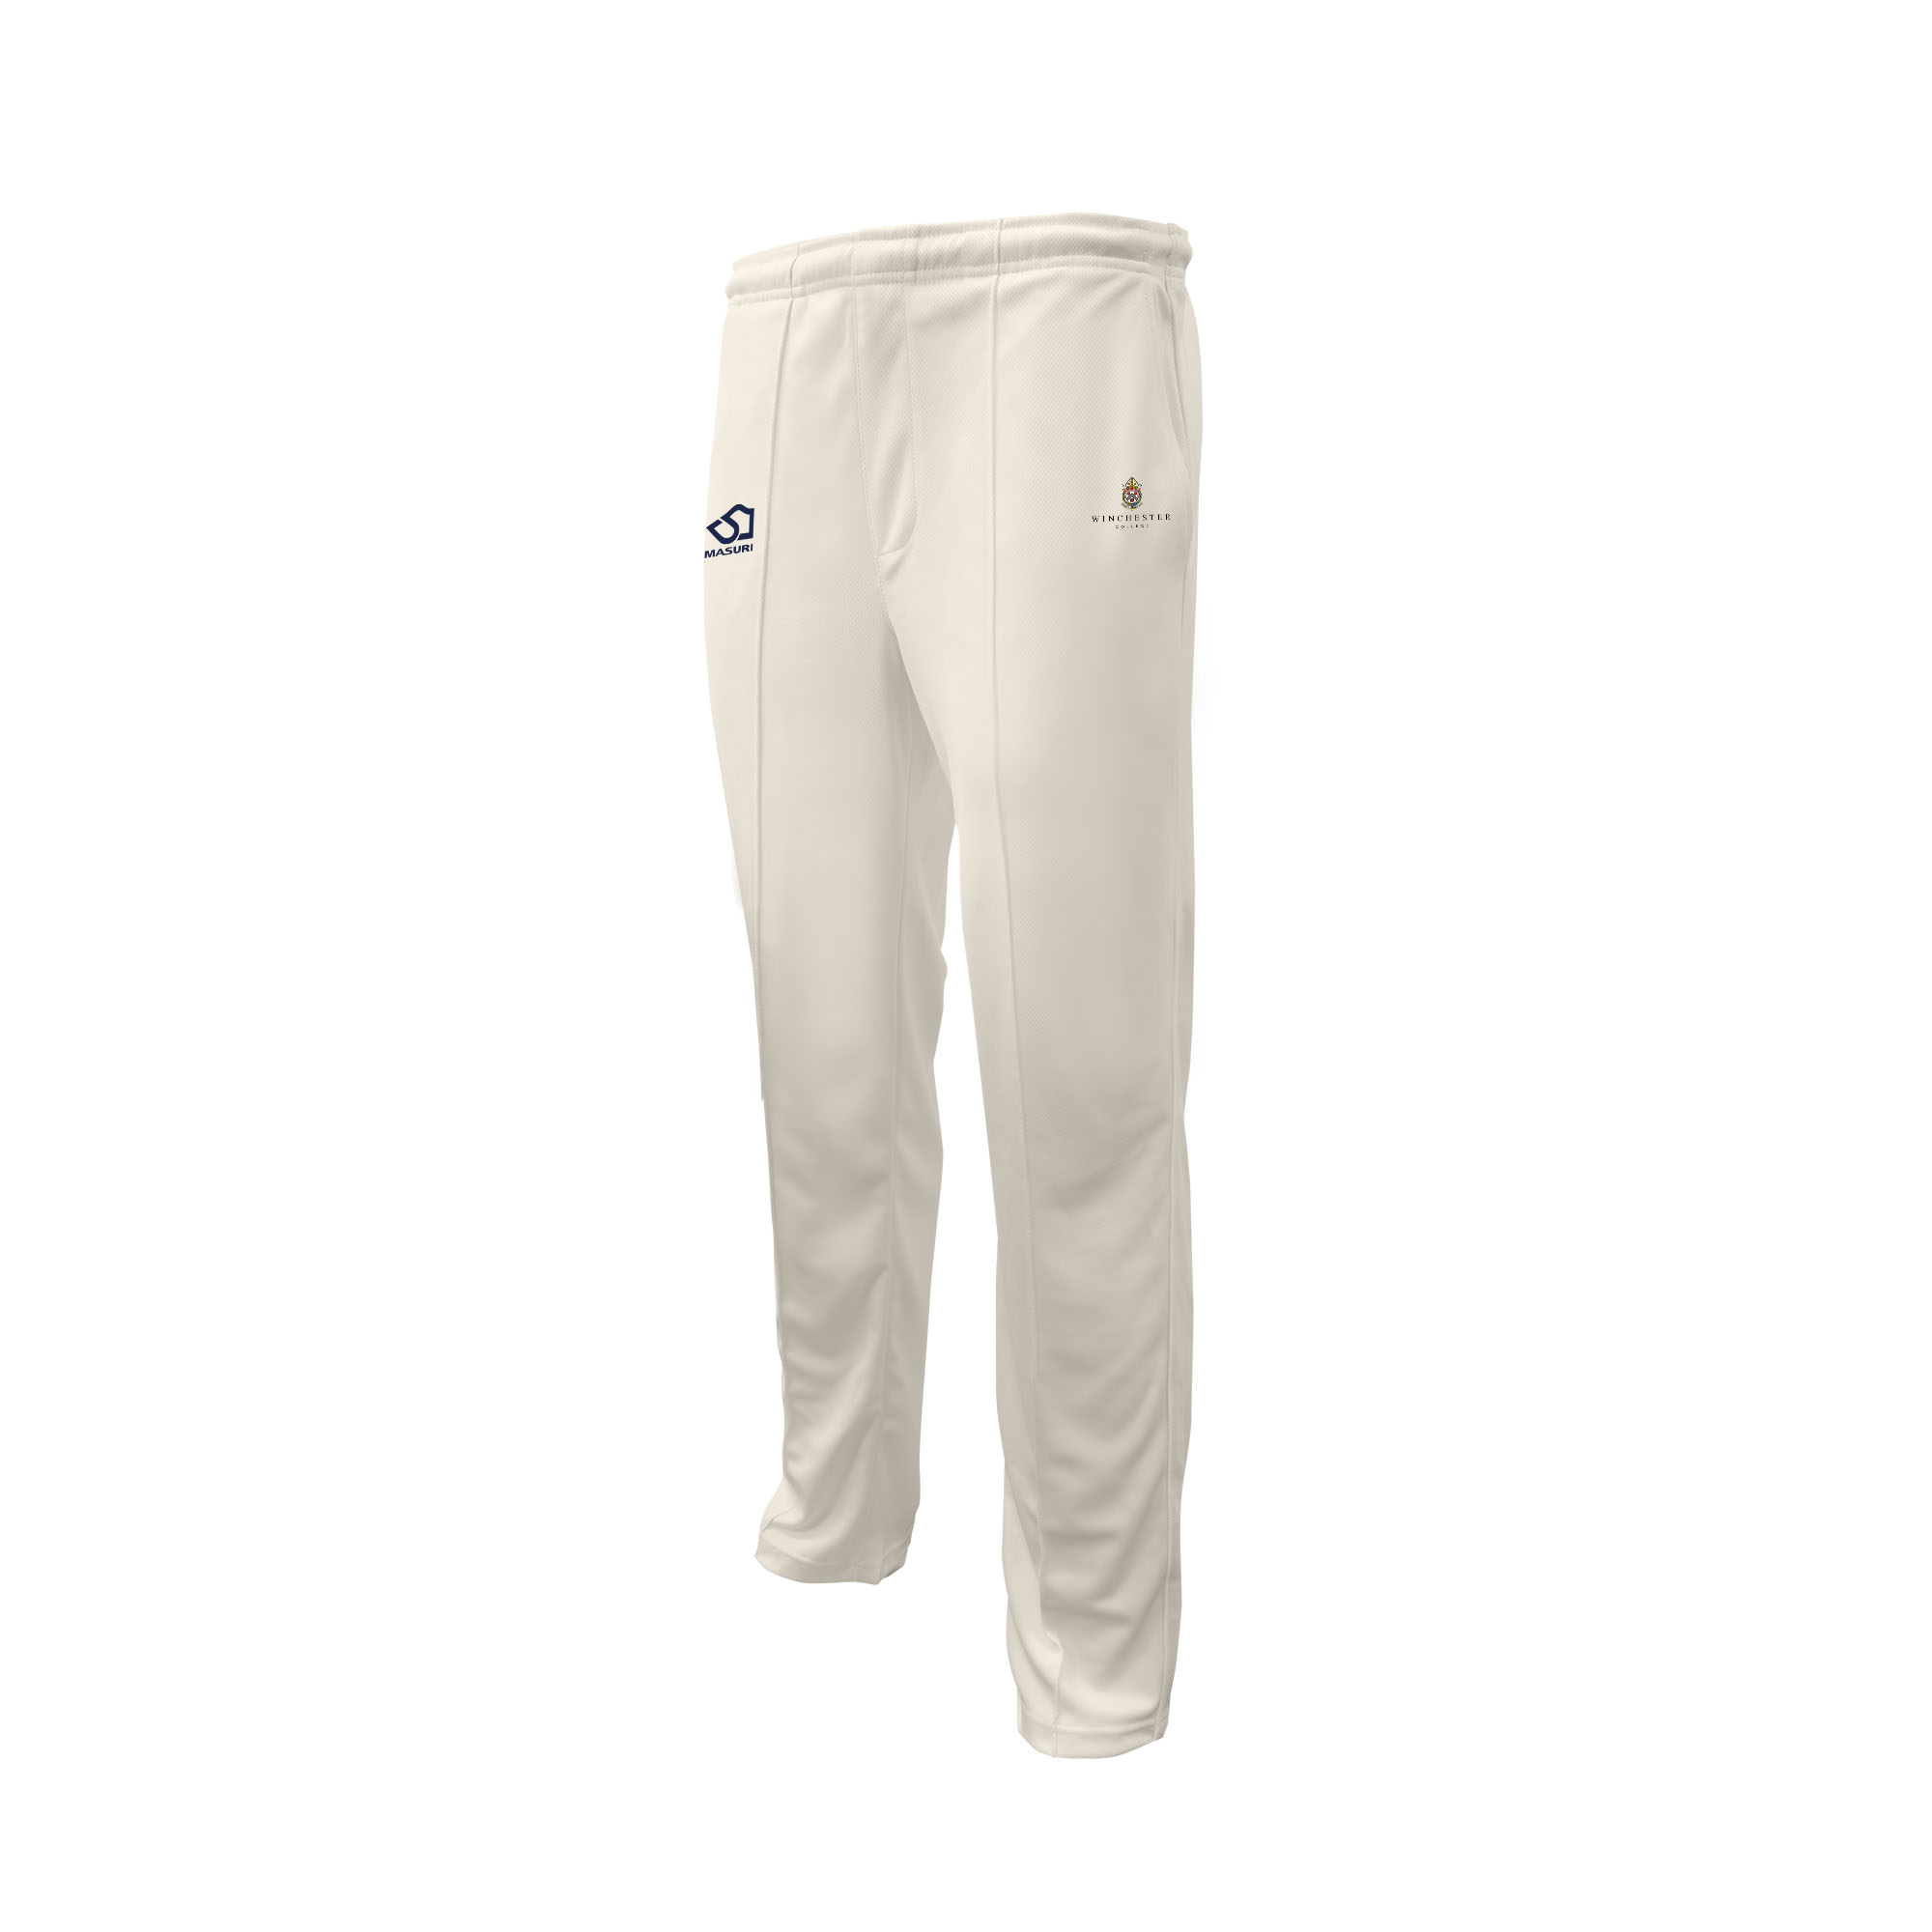 Buy GM Trousers Online India GM Cricket Pants Online Store